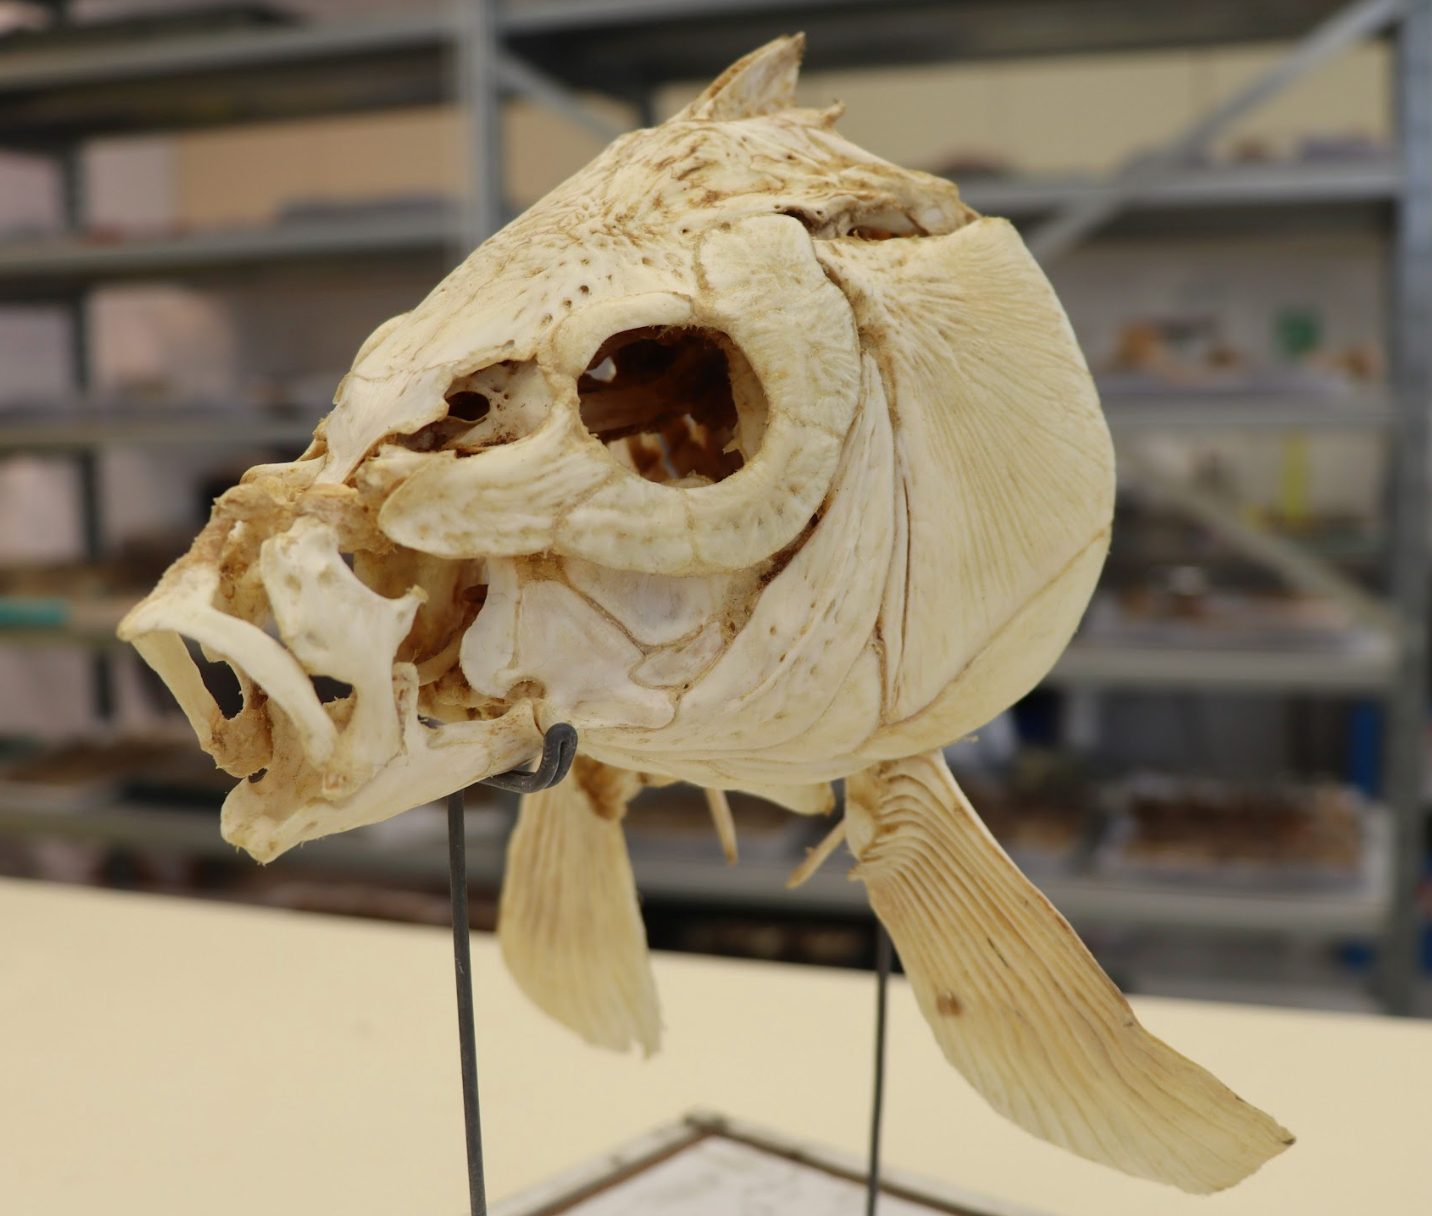 The study shows that human ancestors were catching and eating 6-foot-long, carp-like fish more than 780,000 years ago.